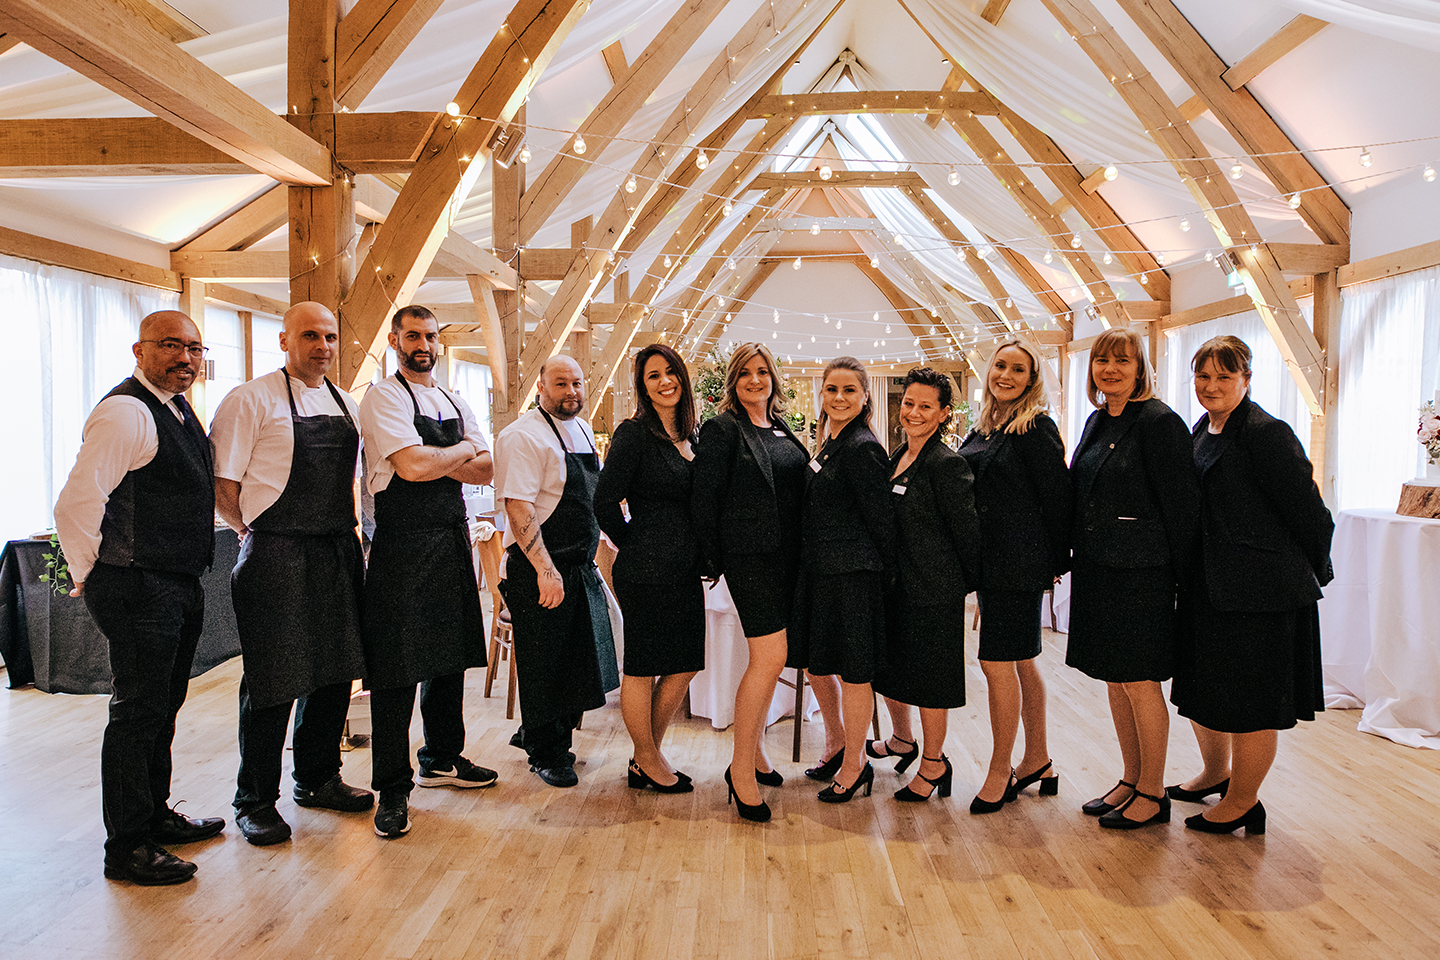 the events team at Bassmead Manor Barns will work with you every step of the way during your wedding planning journey